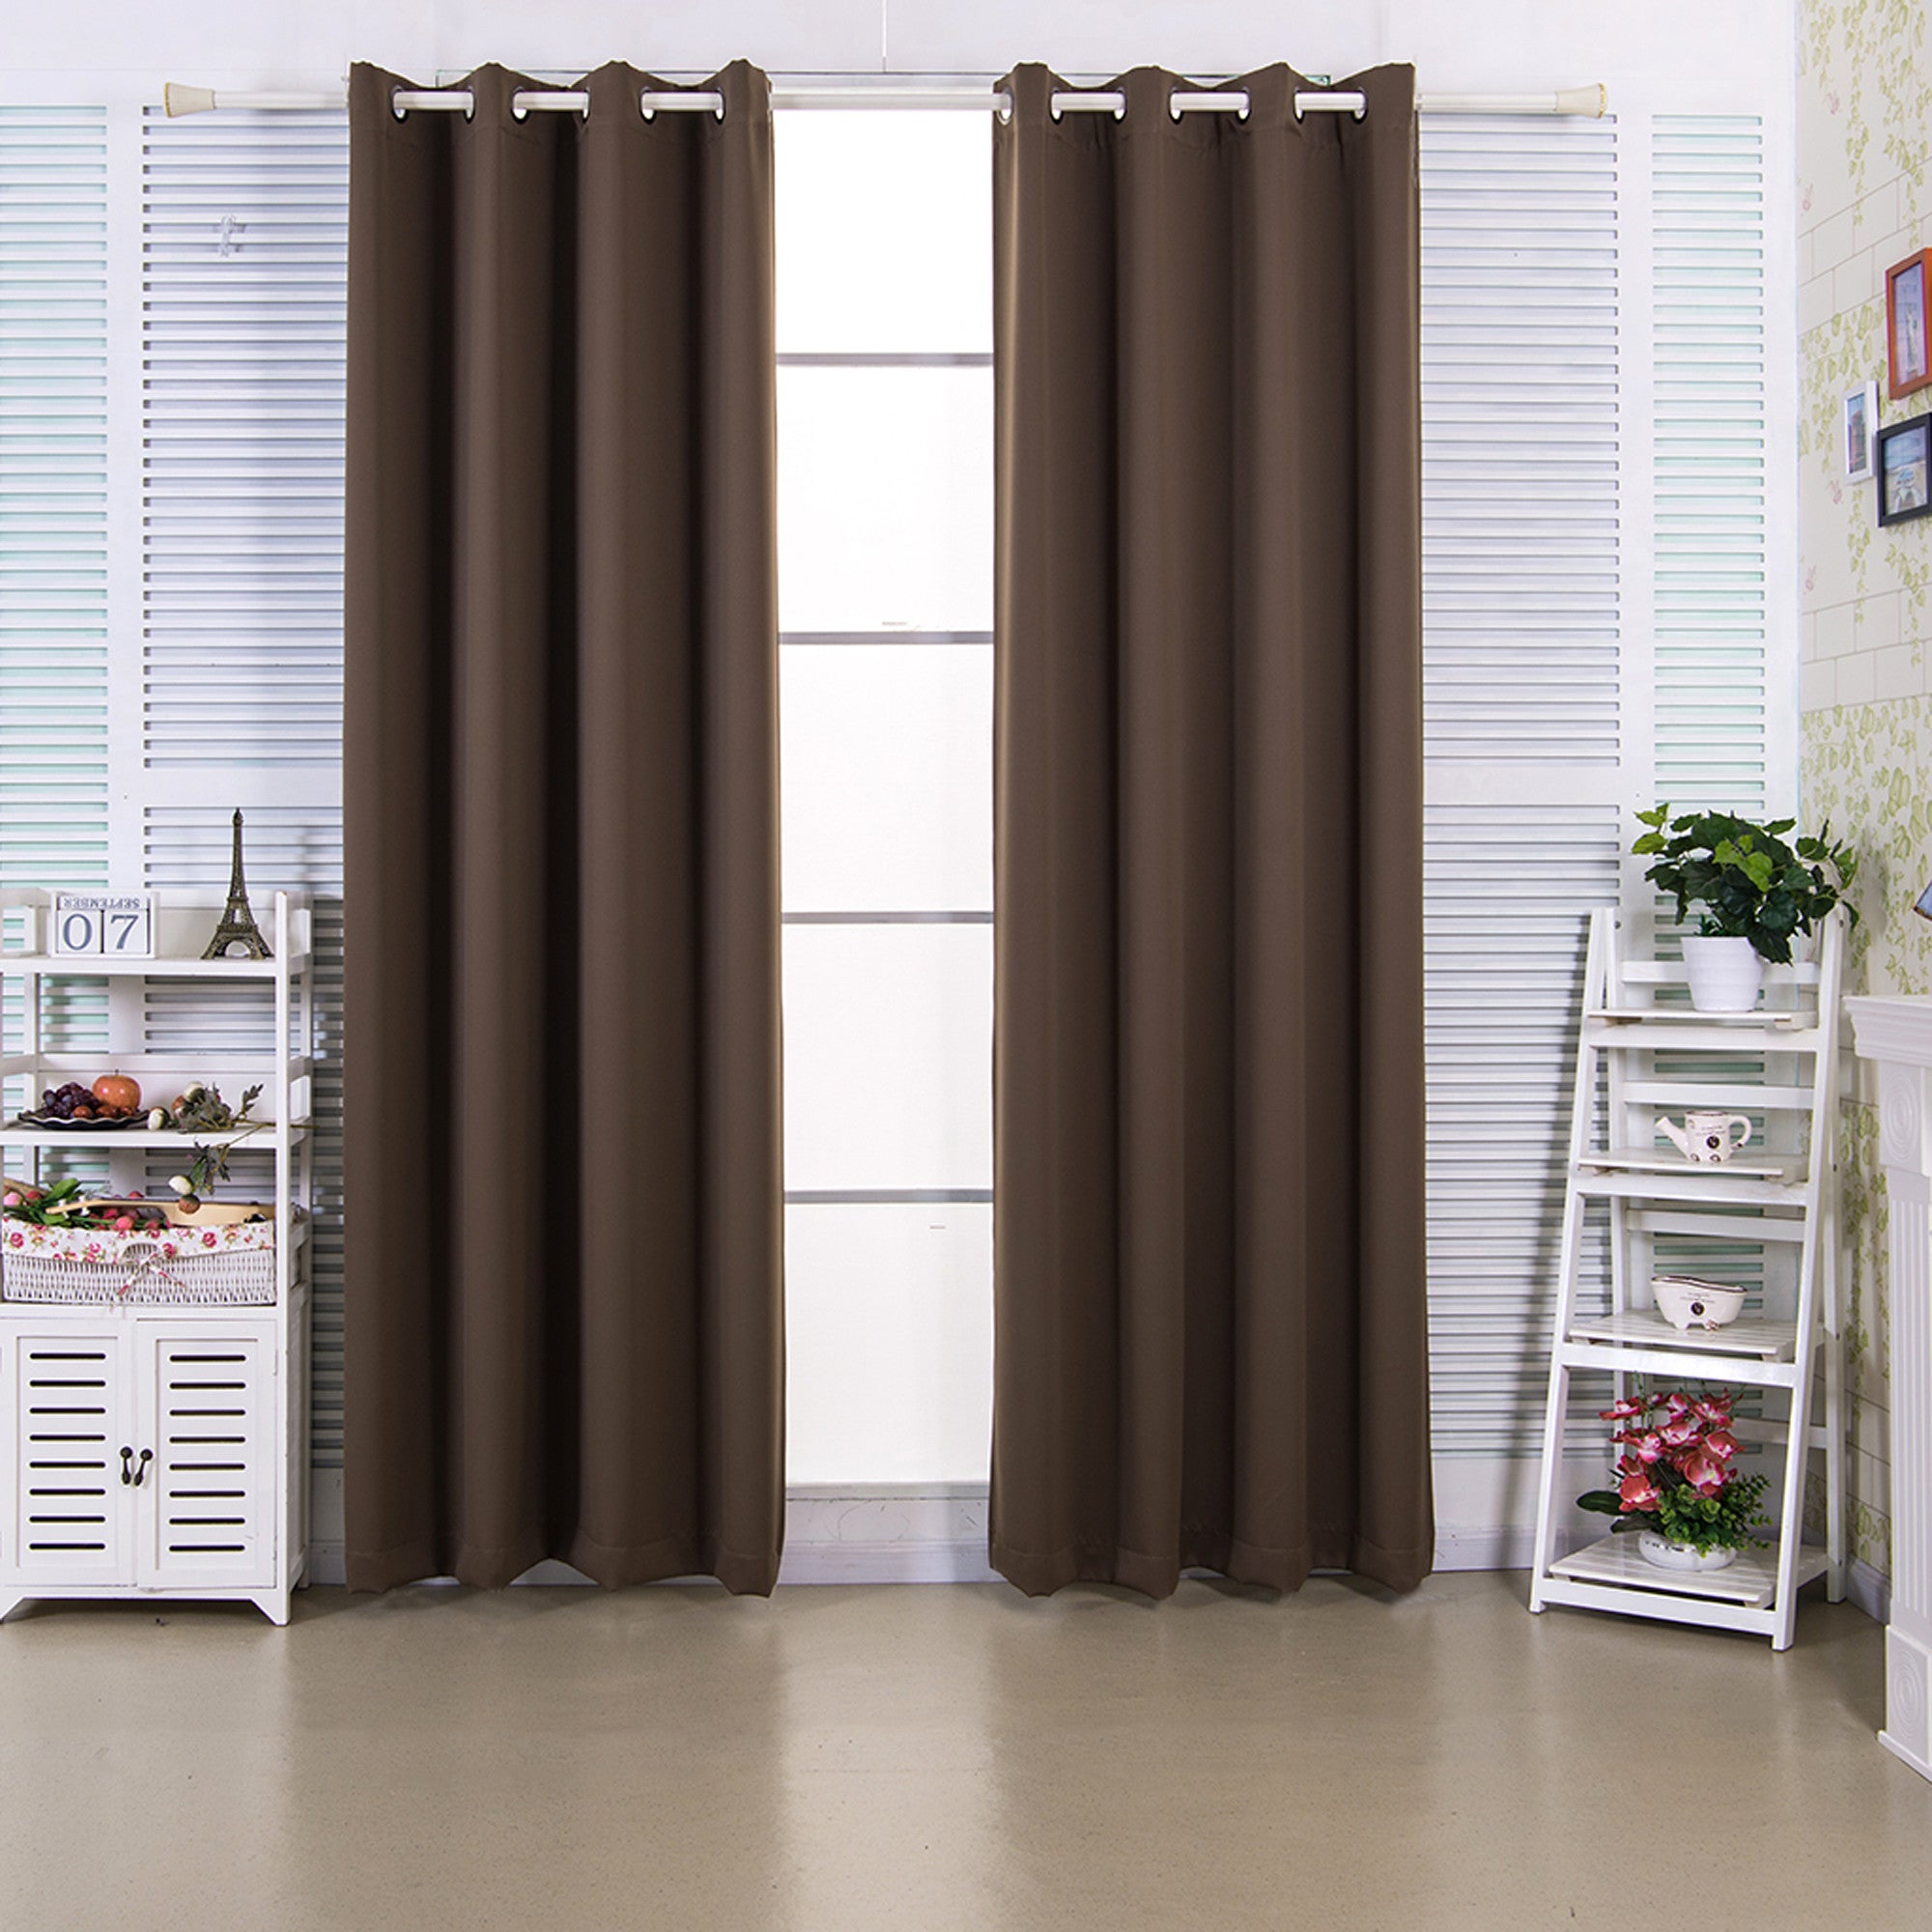 Teamson Home 96" Edessa Premium Solid Insulated Thermal Blackout Window Curtain Panels with Grommets, Hazelnut Brown